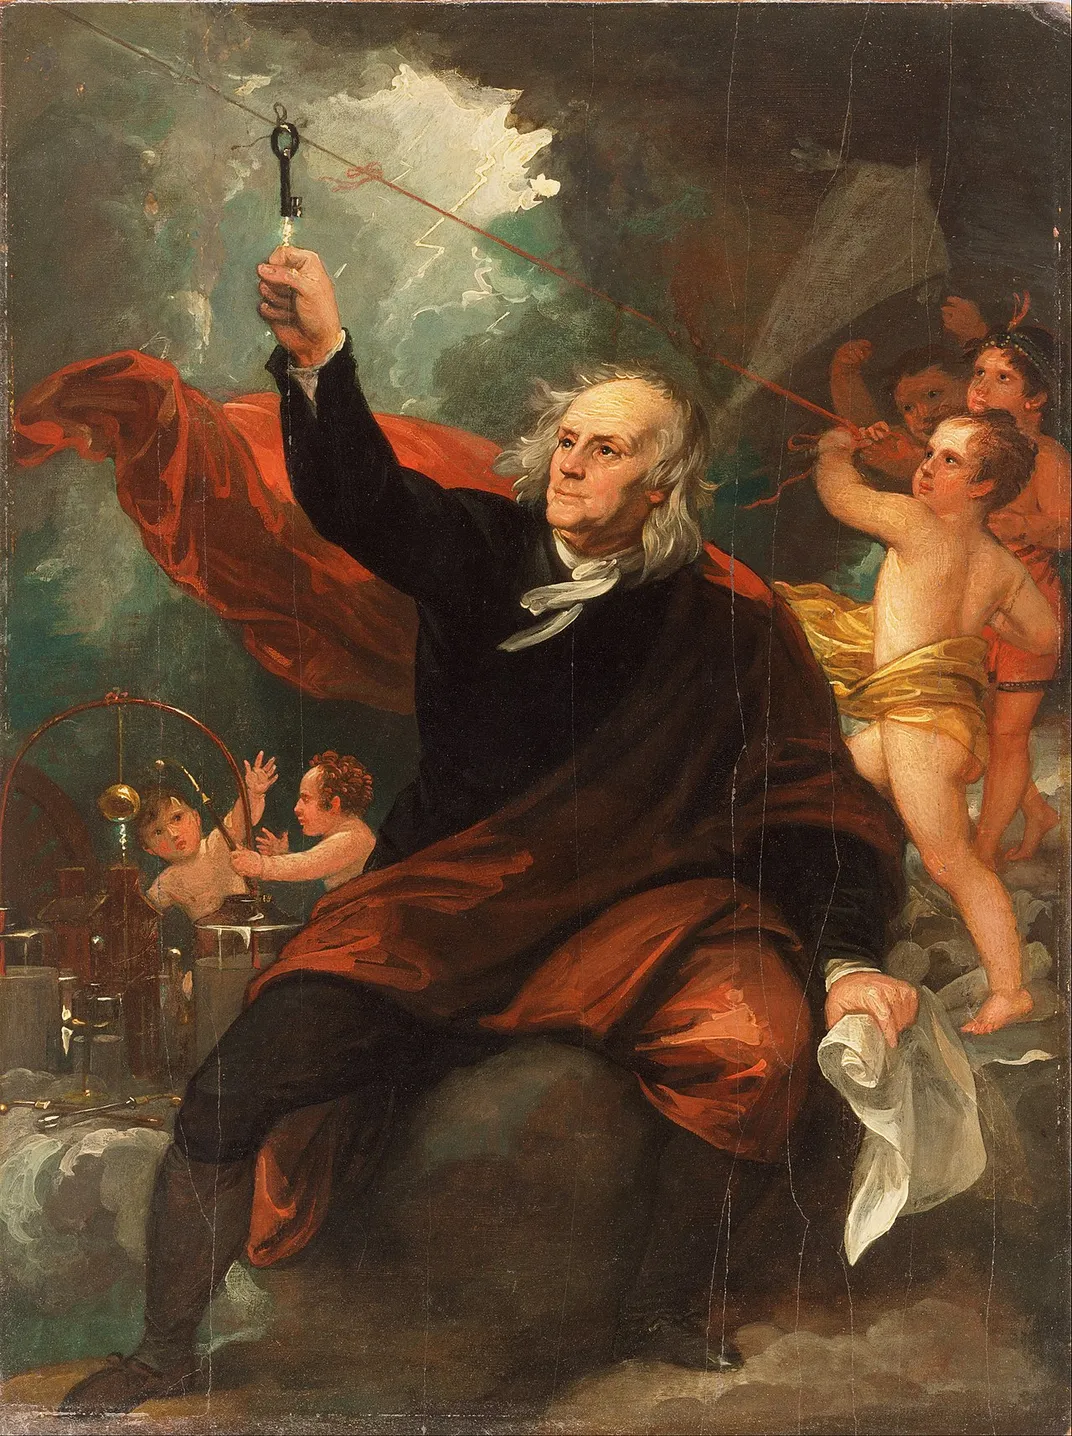 When Benjamin Franklin Shocked Himself While Attempting to Electrocute a Turkey